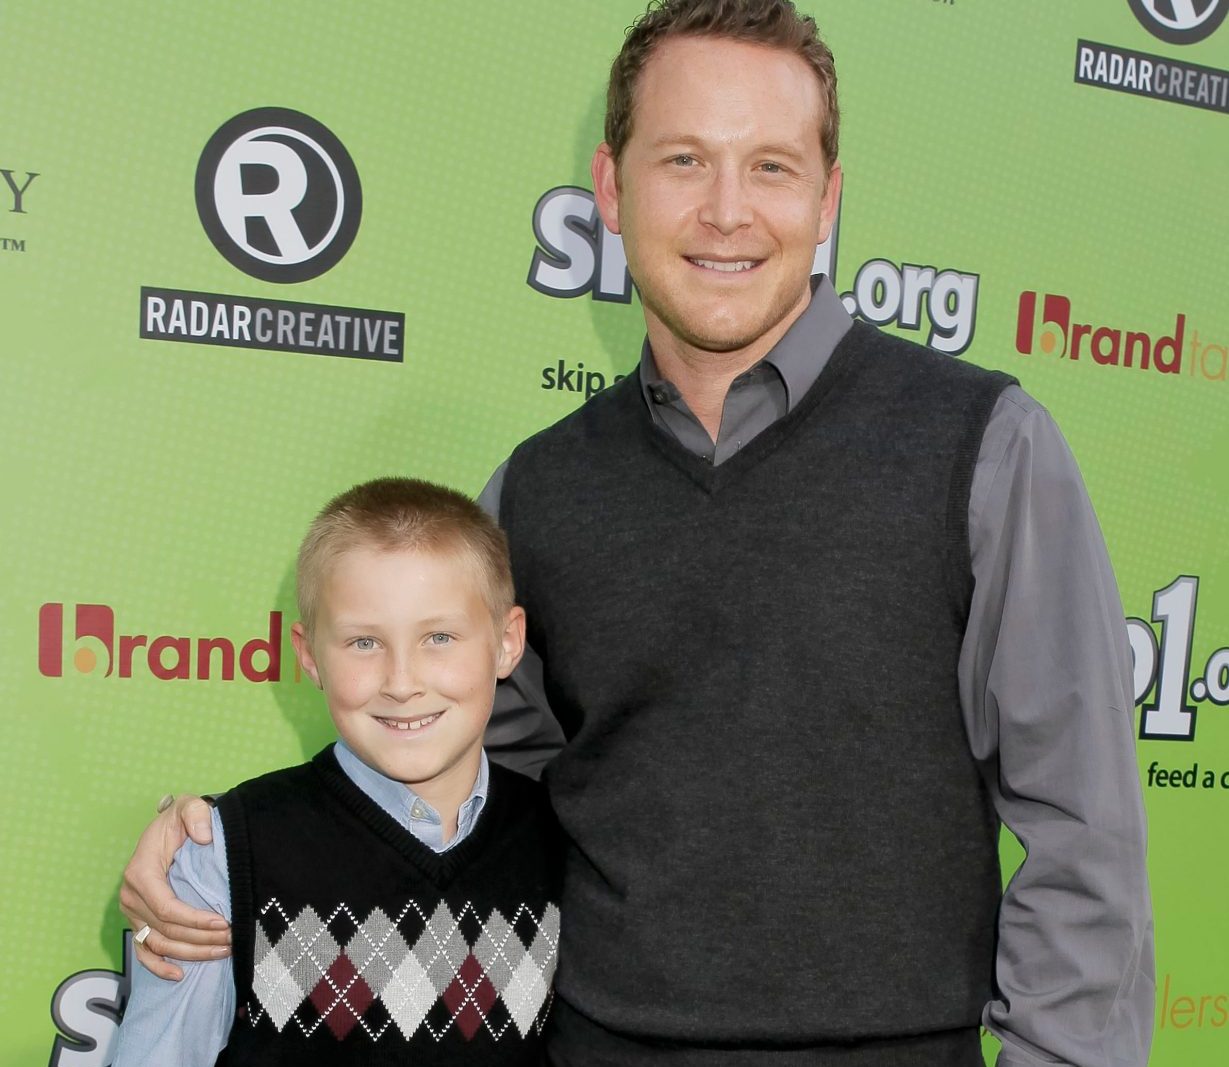 WEST HOLLYWOOD, CA - APRIL 06: Cole Hauser (R) and son attends the Skip1.org's 'Skip And Donate' gala event at The Lot on April 6, 2013 in West Hollywood, California. (Photo by Tibrina Hobson/FilmMagic)